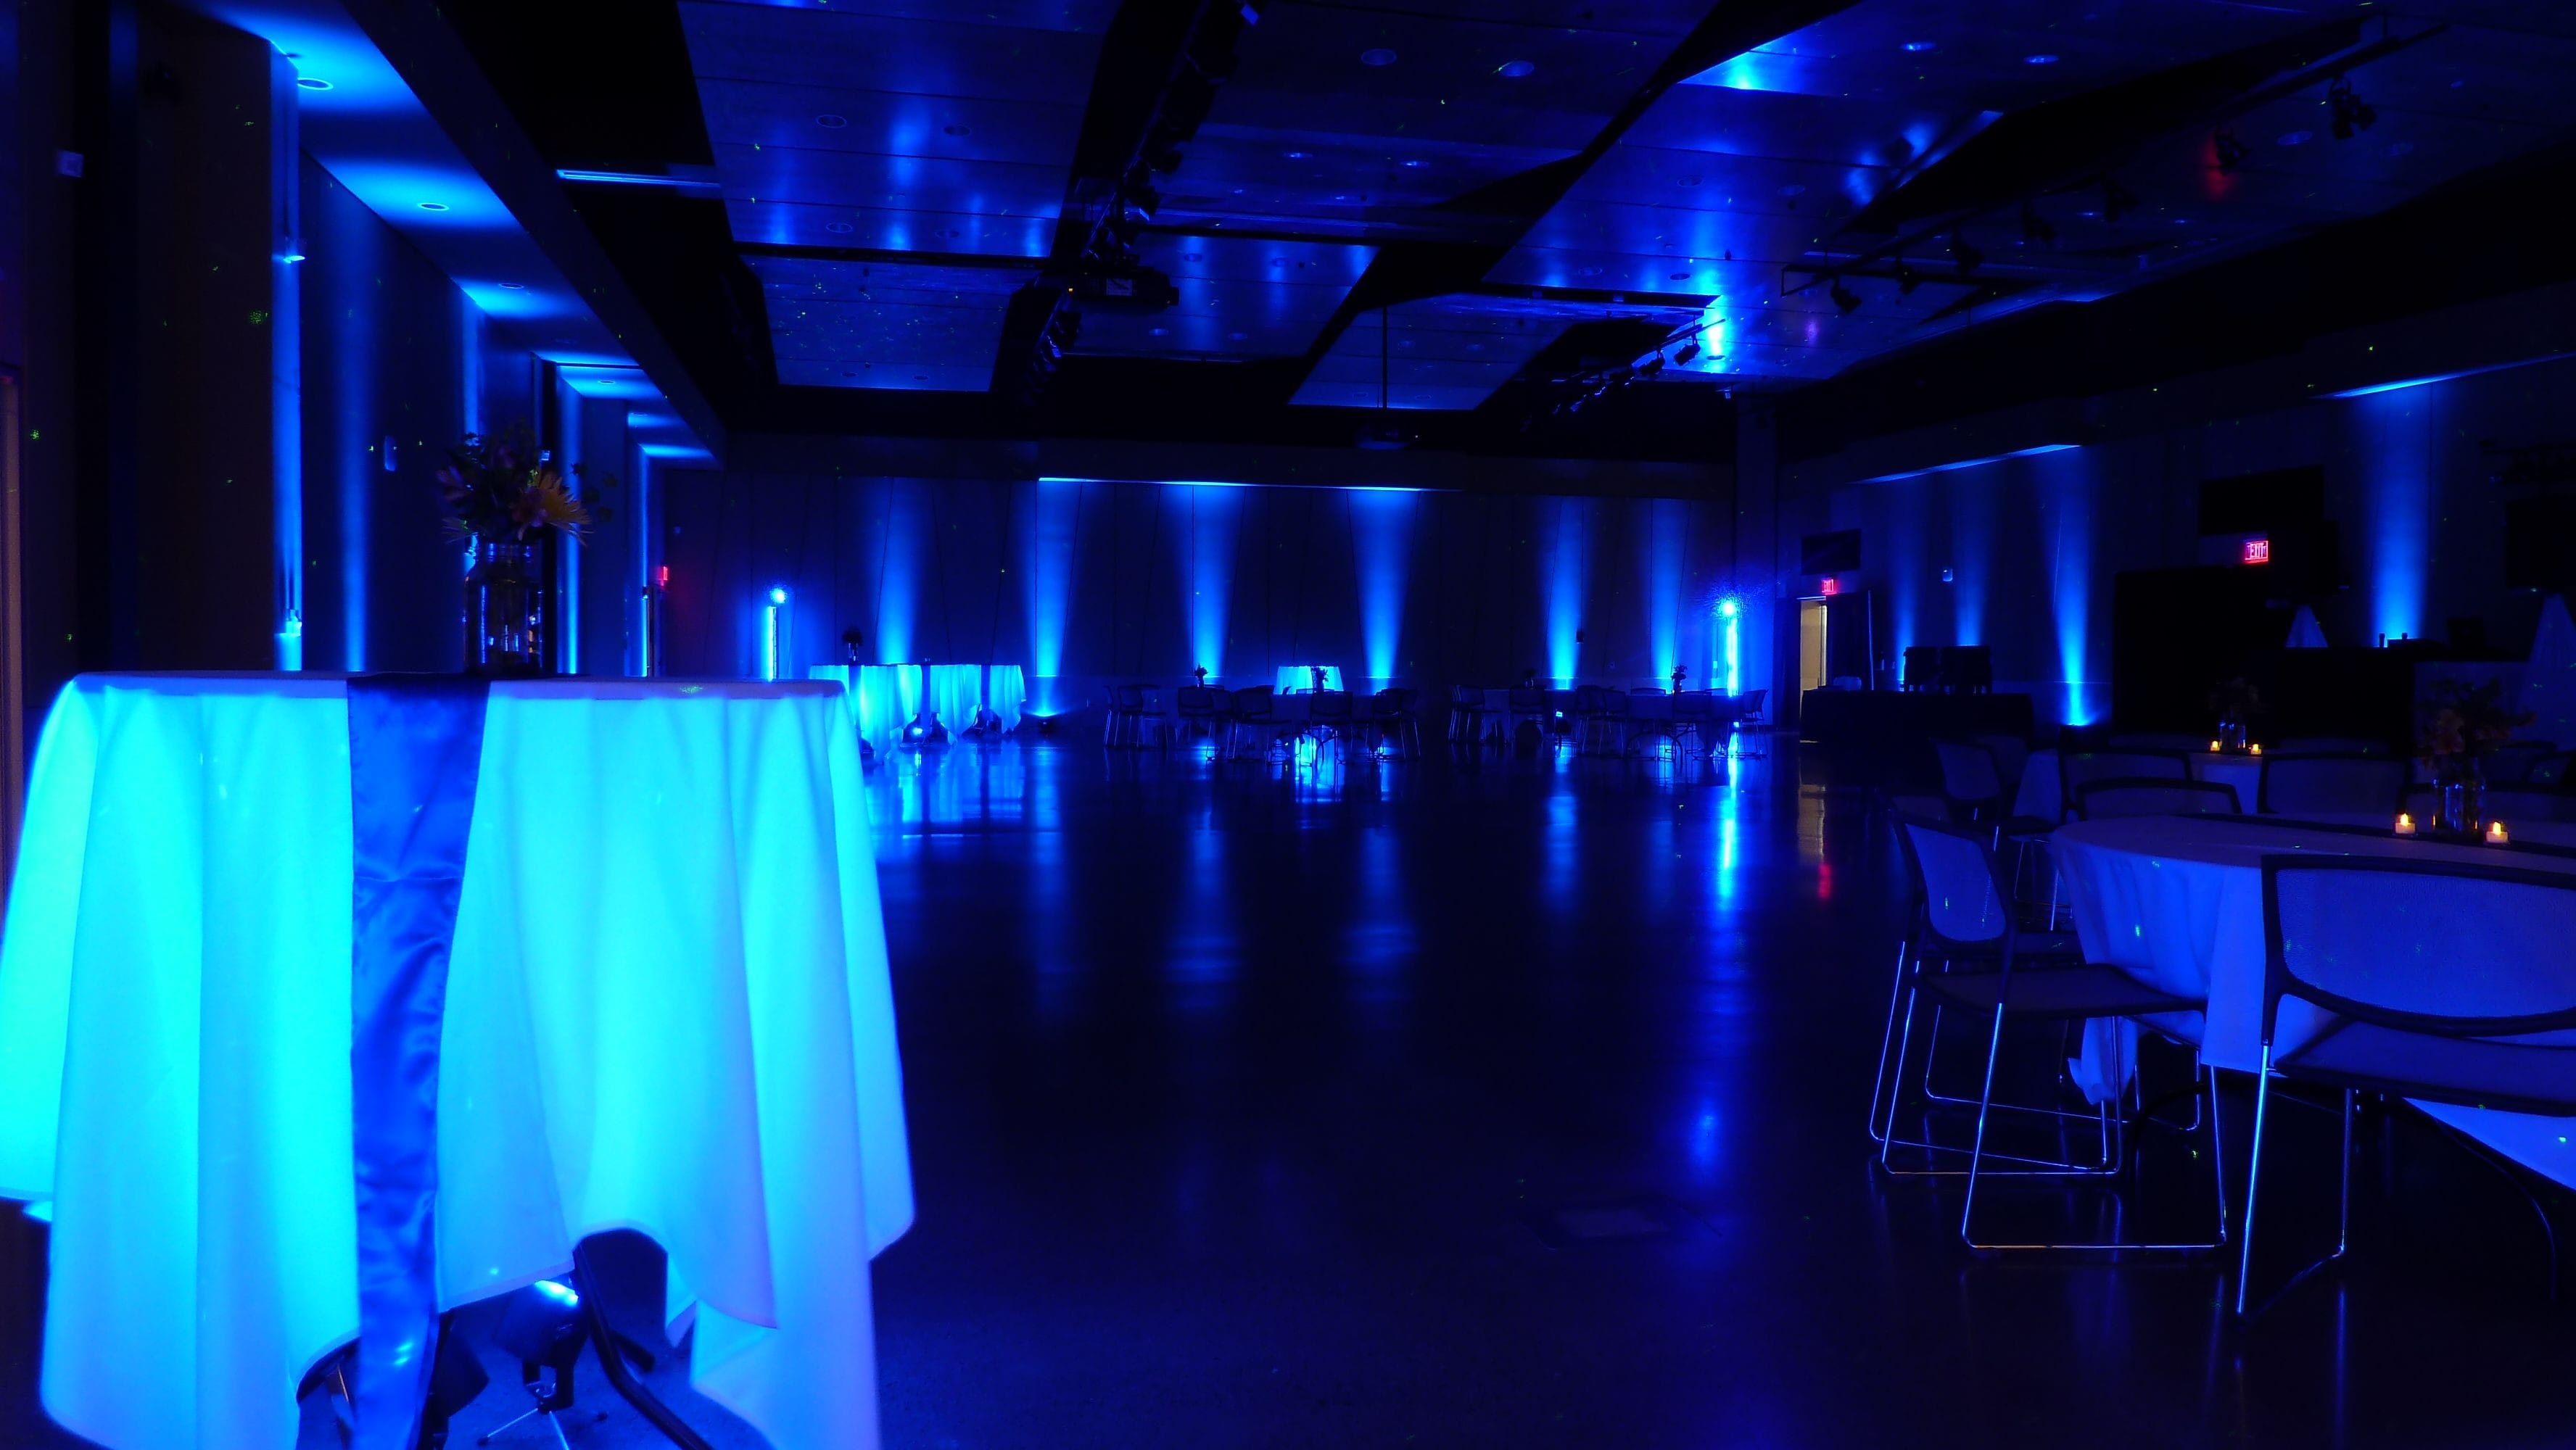 Wedding lighting at UWS, Yellowjacket Union. Up lighting in blue with glowing cocktail tables.